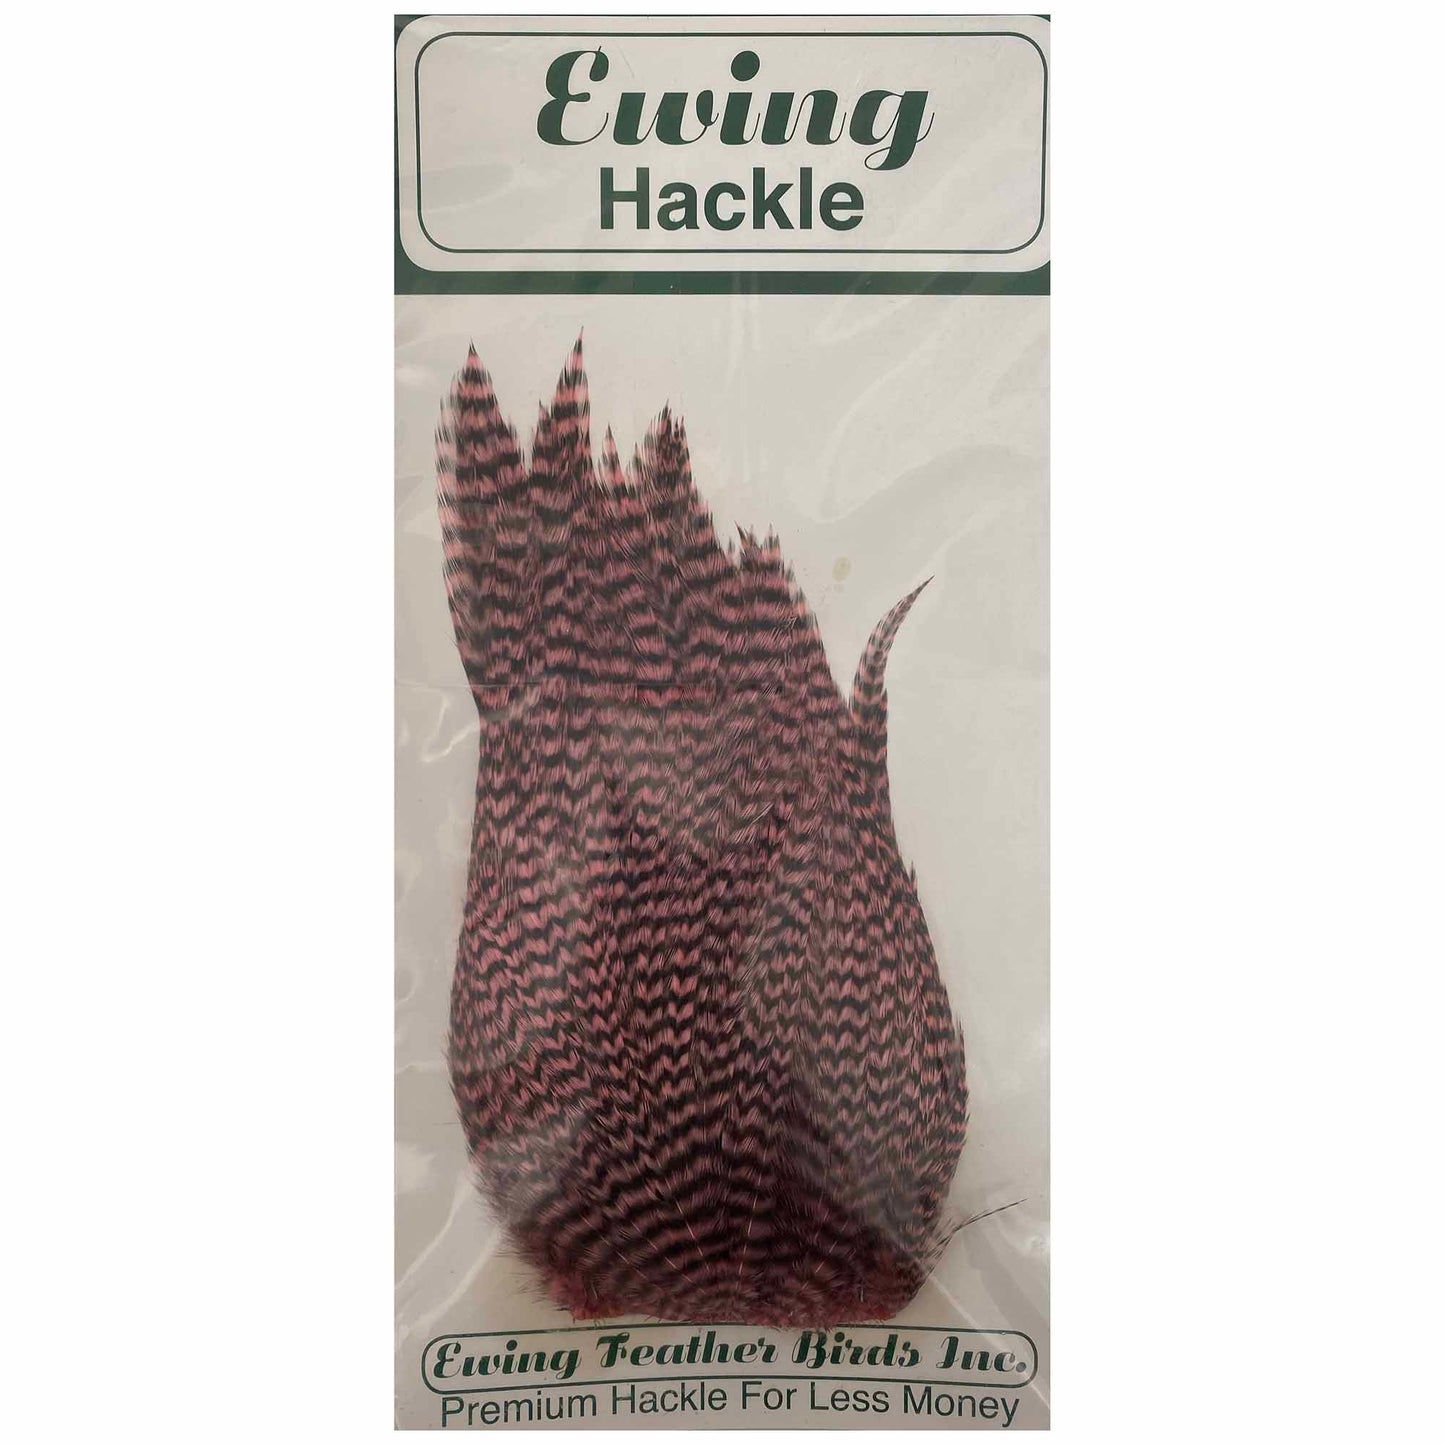 Ewing Hackle Deceiver Patch-Fly Fishing - Fly Tying Material-Ewing Hackle-Grizzly Pink-Fishing Station